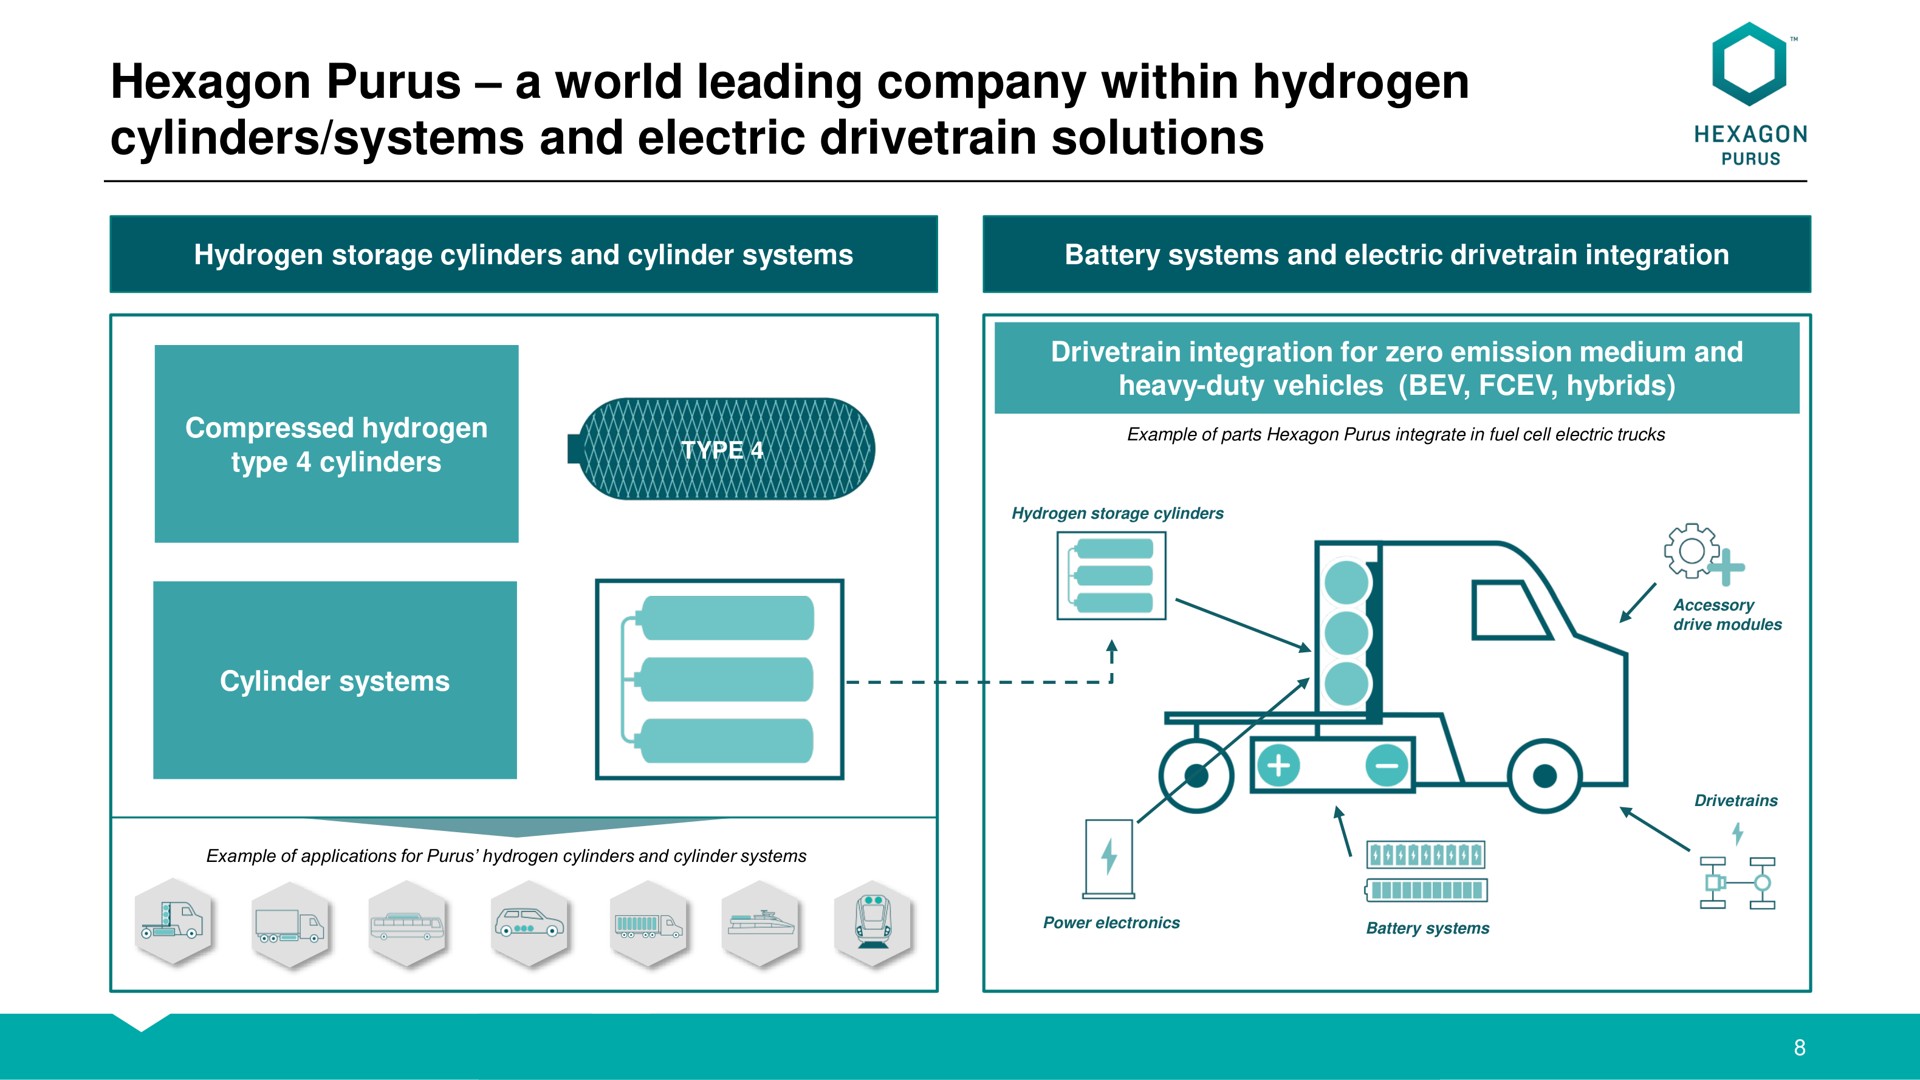 hexagon a world leading company within hydrogen cylinders systems and electric solutions | Hexagon Purus